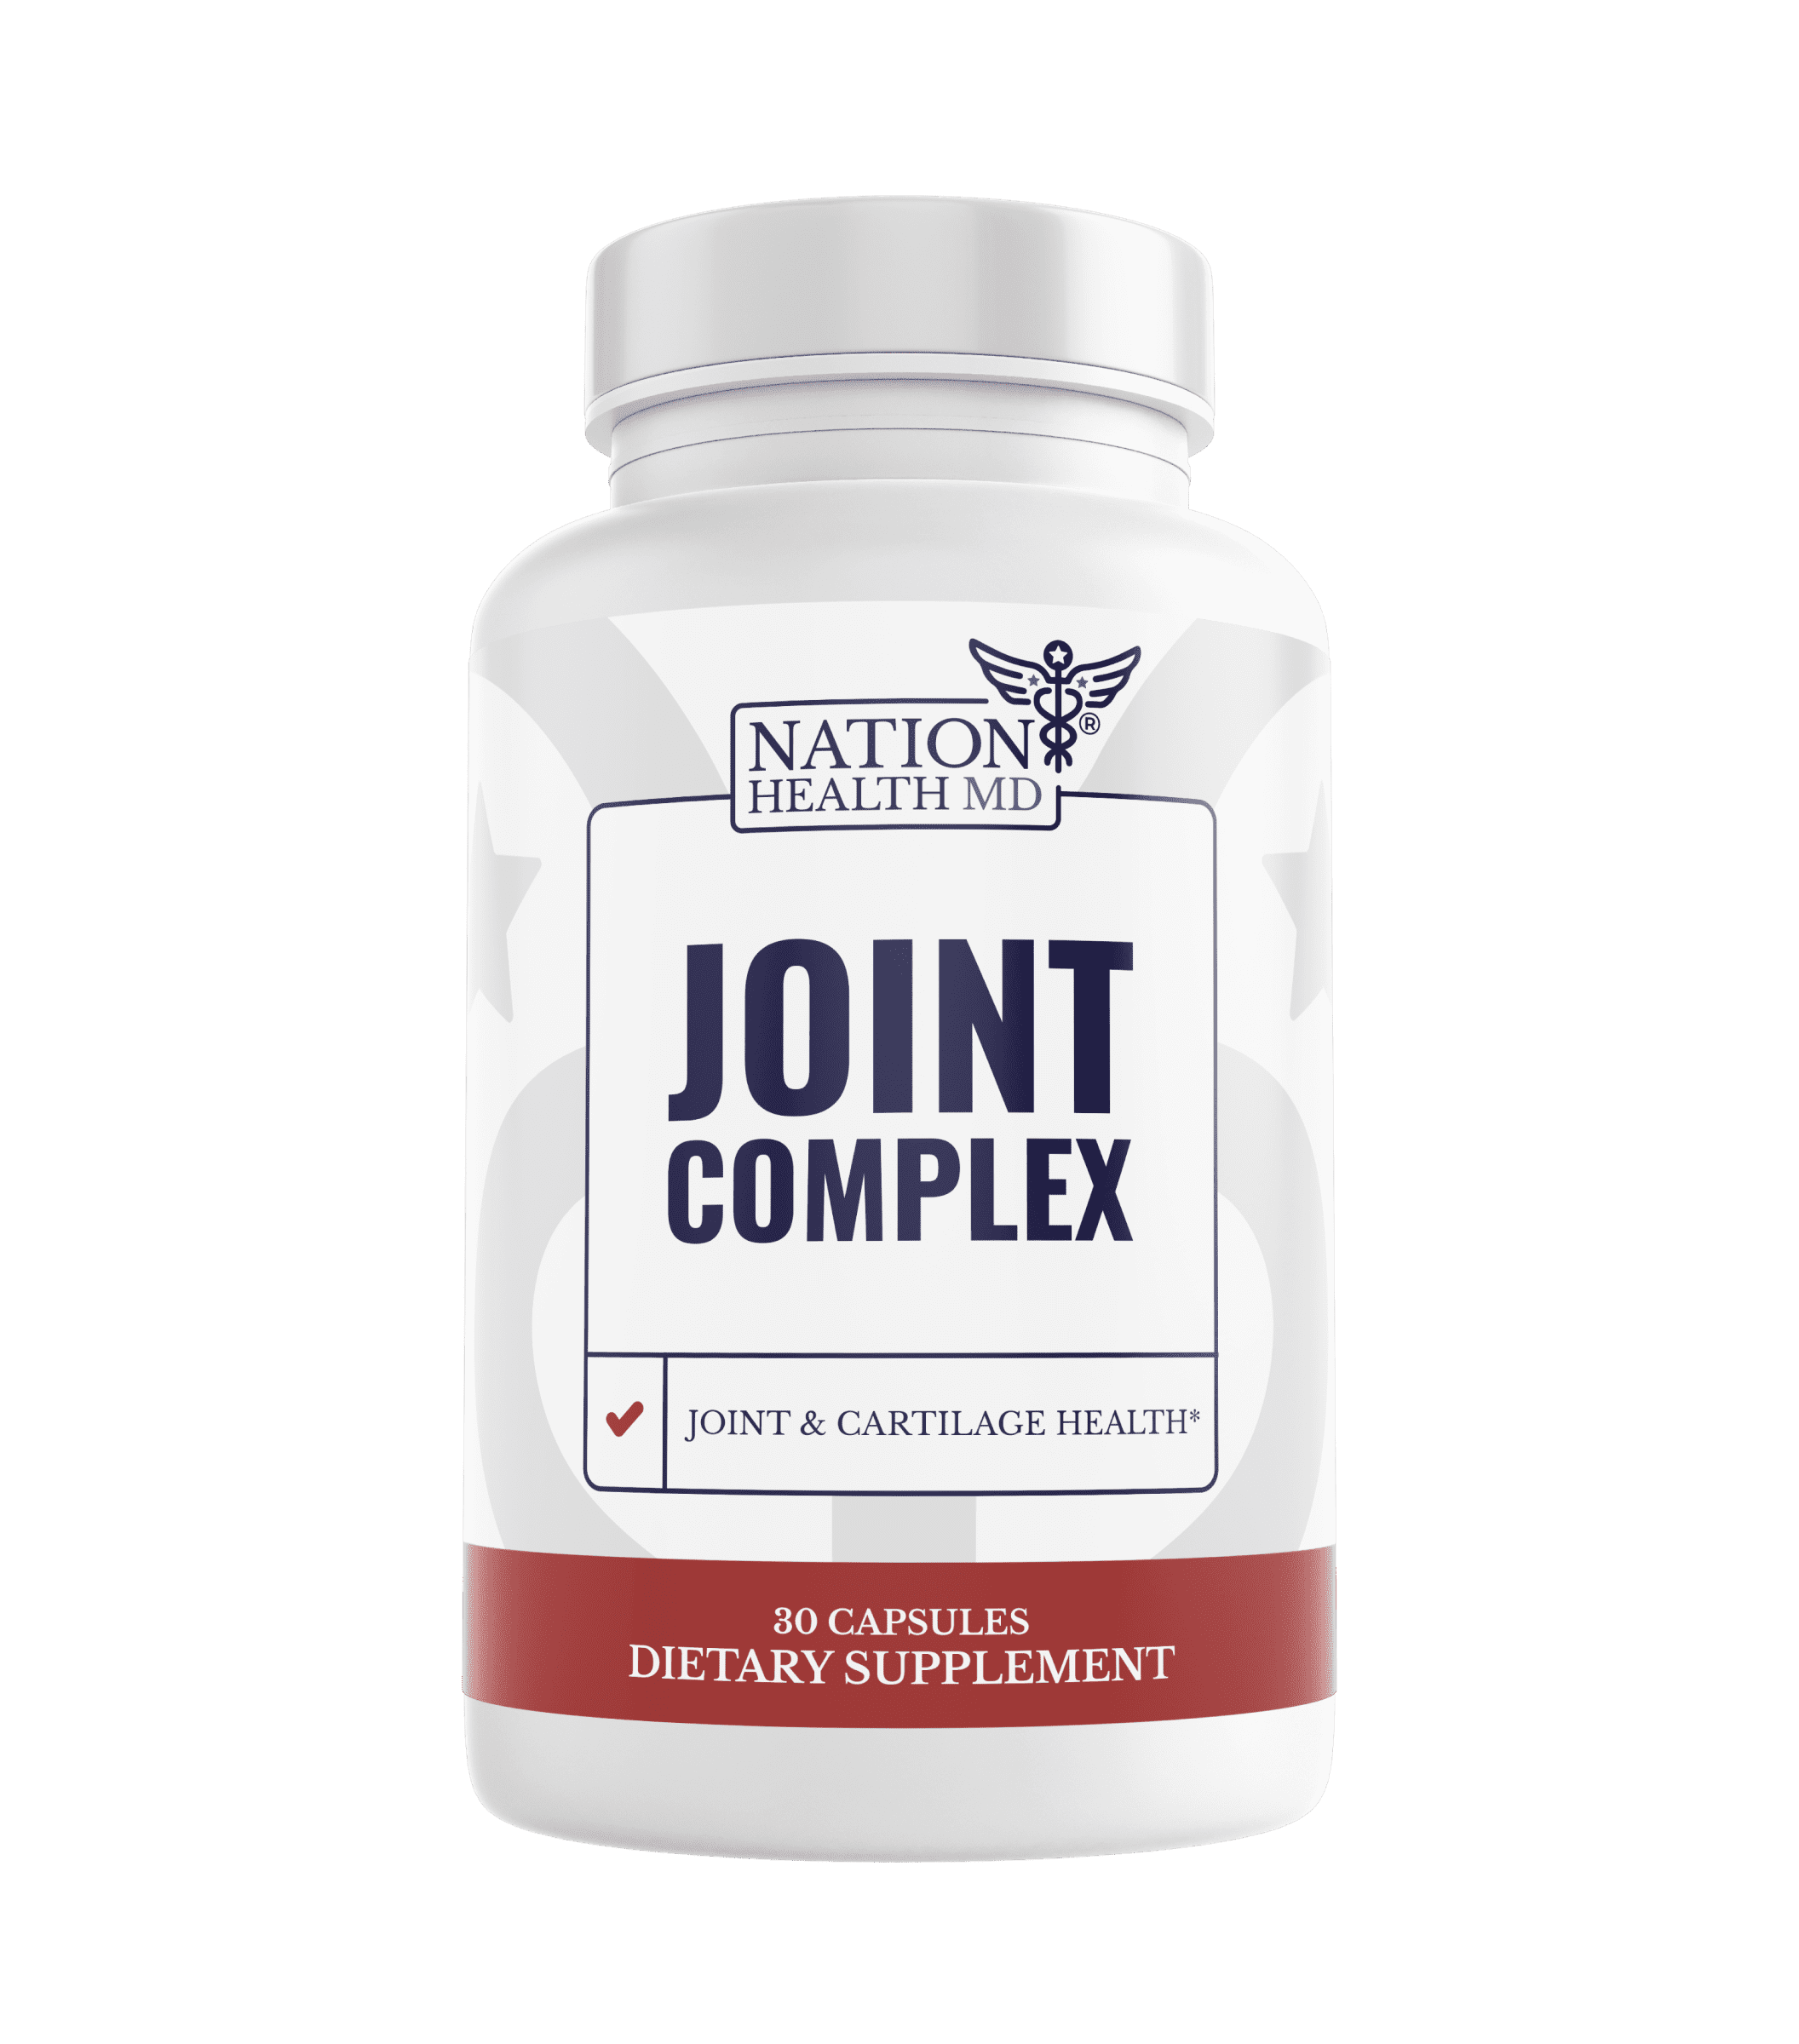 Joint Complex Reviews